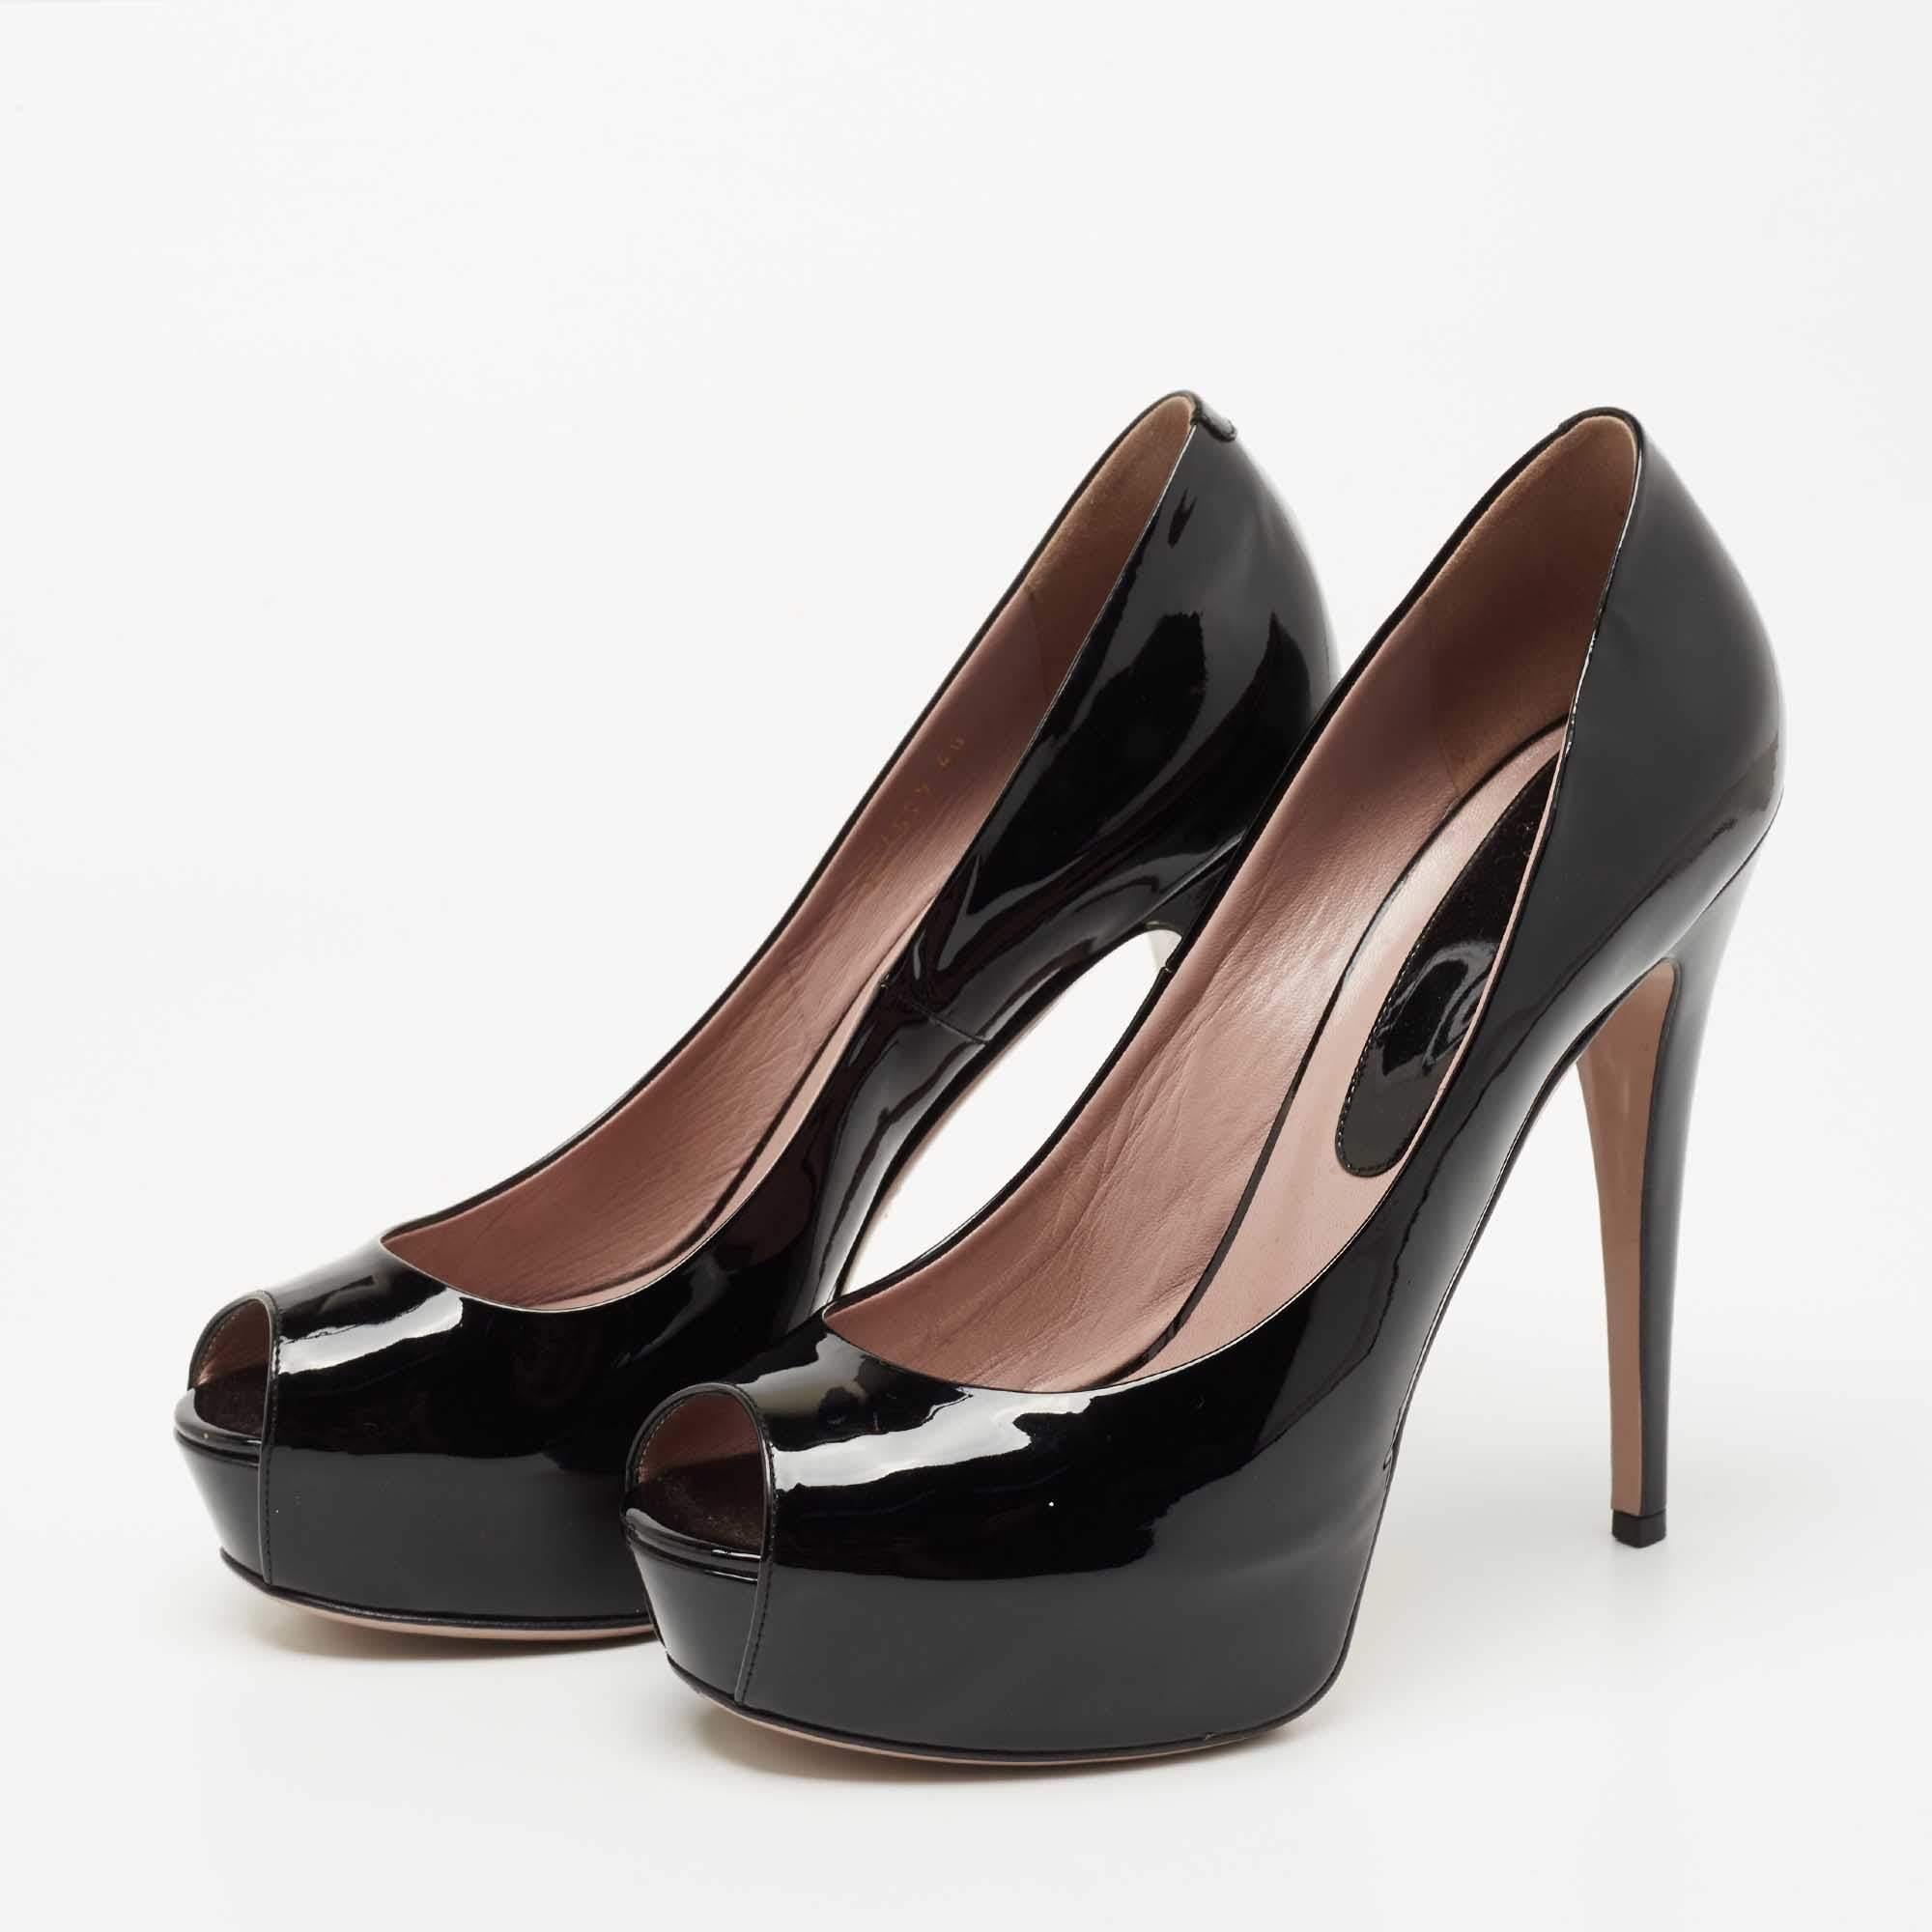 This pair of pumps is uniquely designed and makes for a distinct appearance. Created from quality materials, it is enriched with classic elements.

